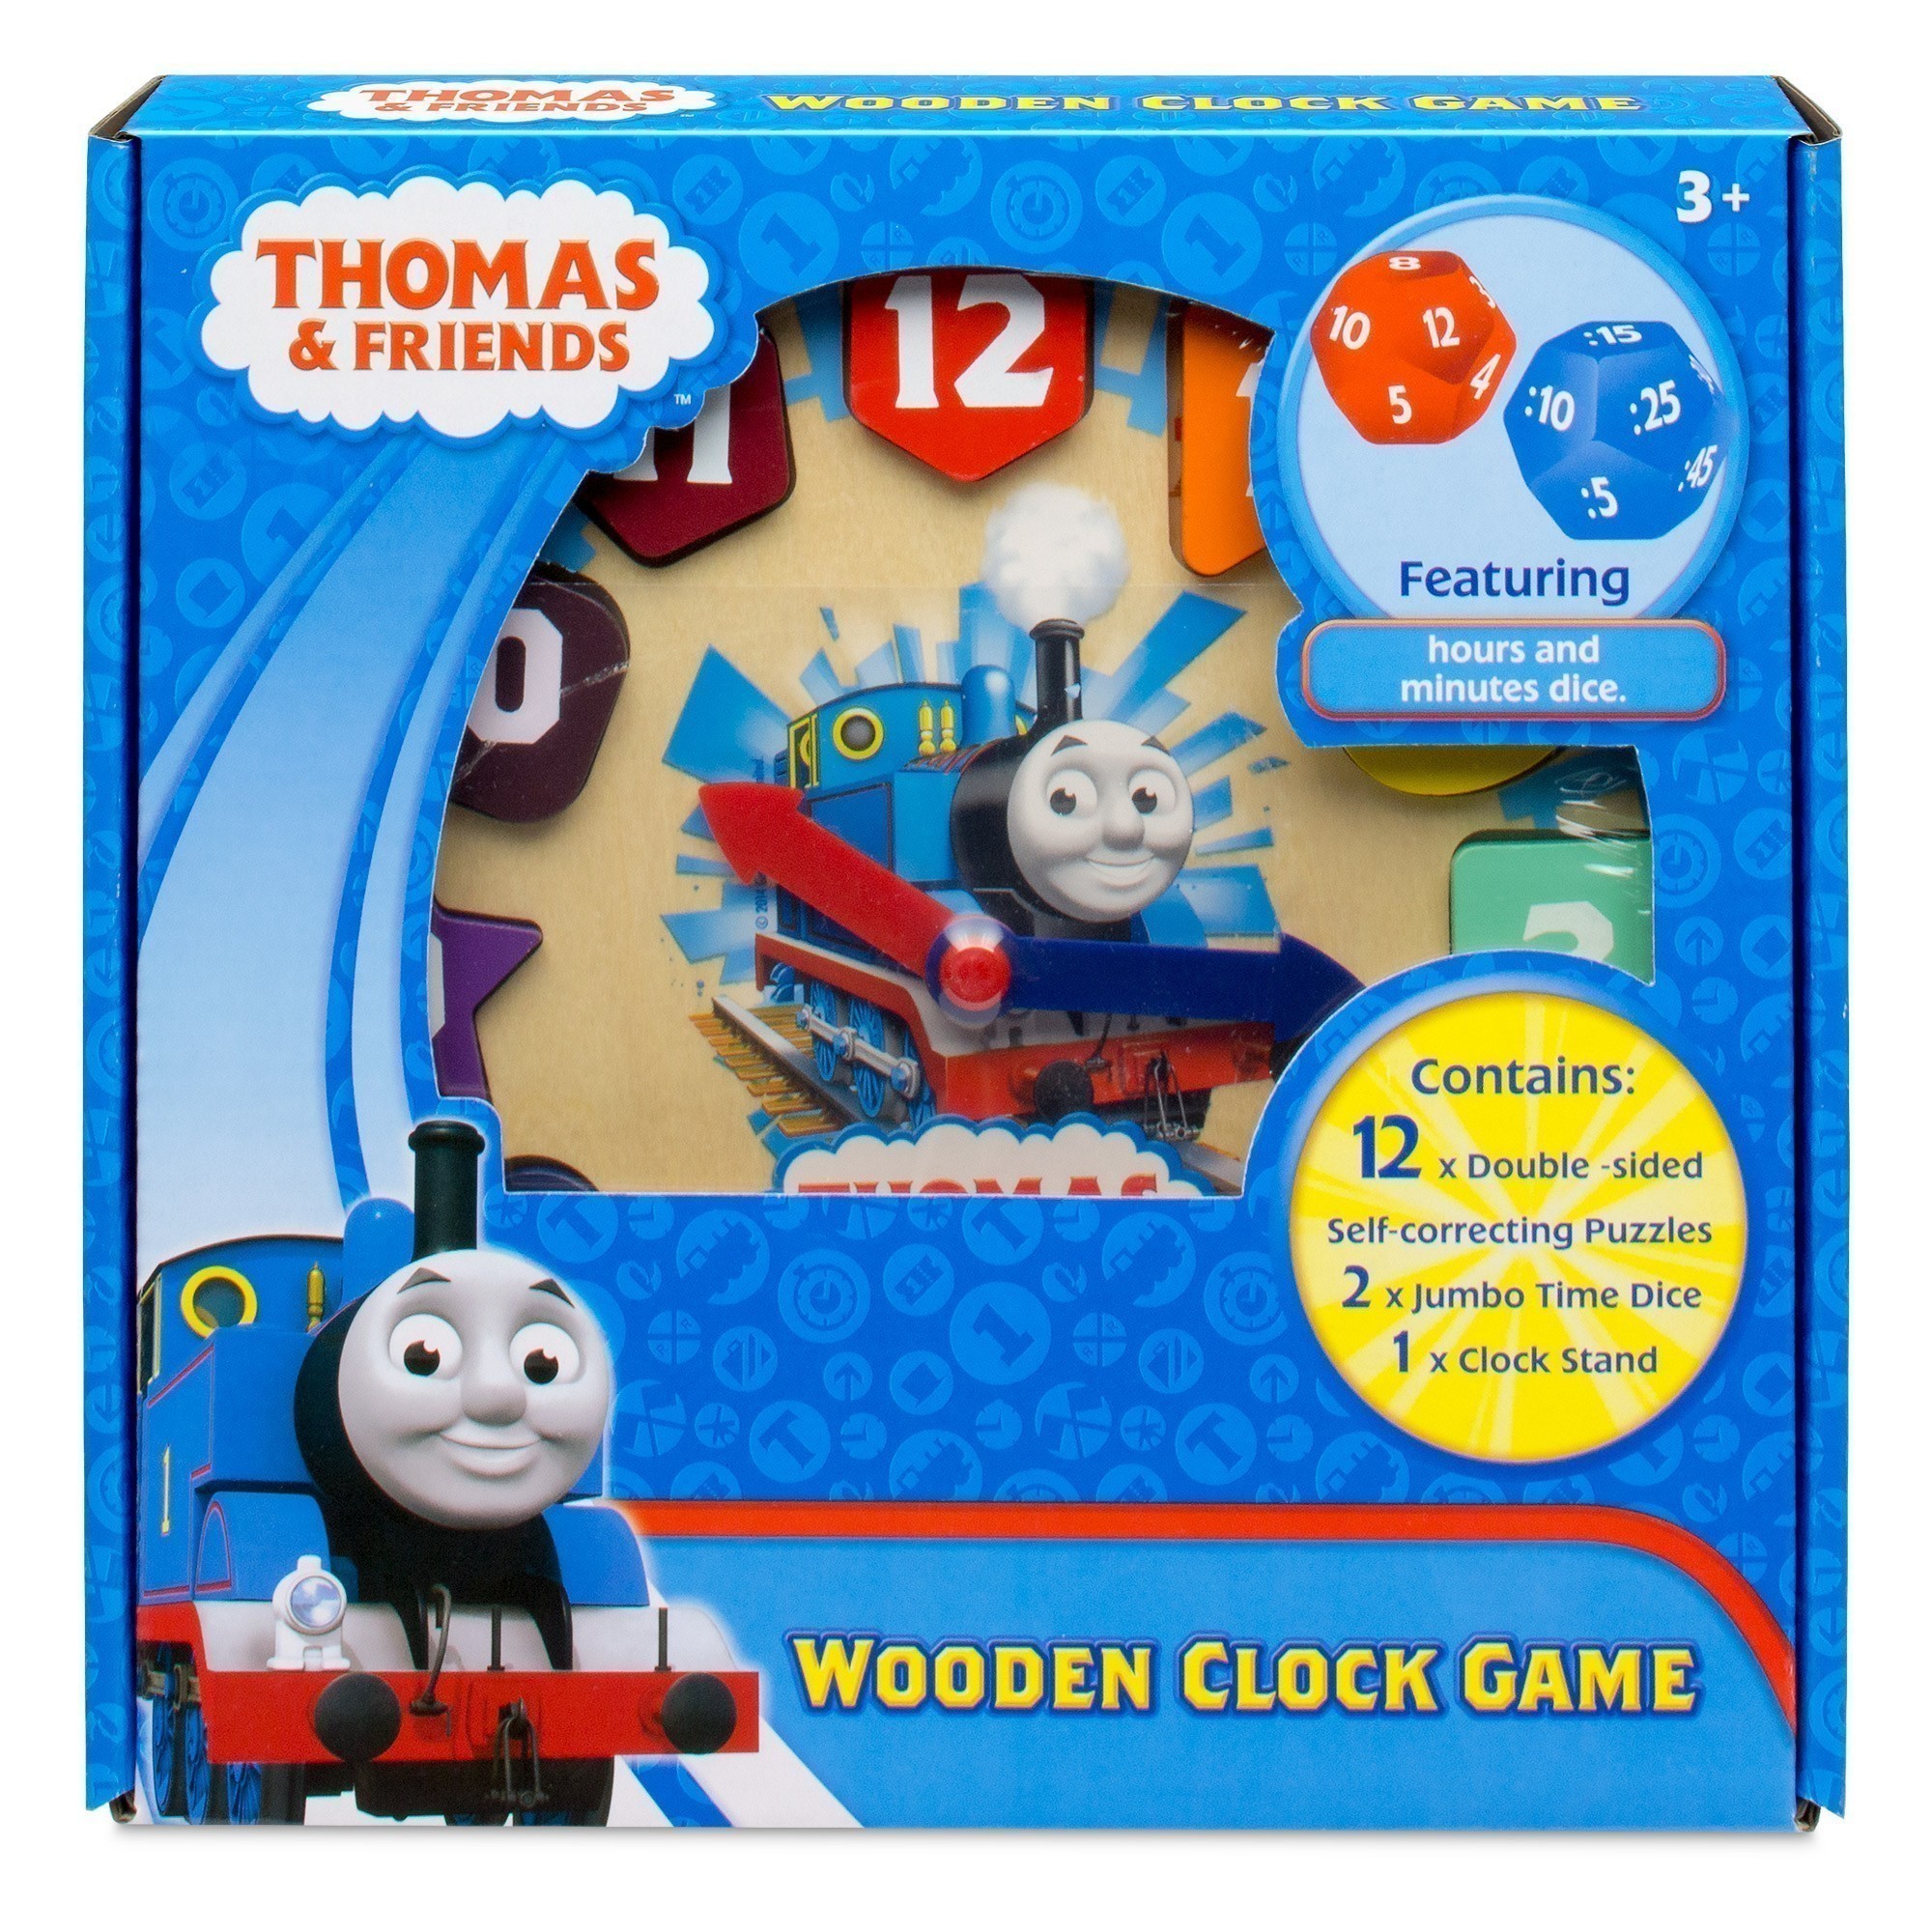 Thomas & Friends - Wooden Clock Game